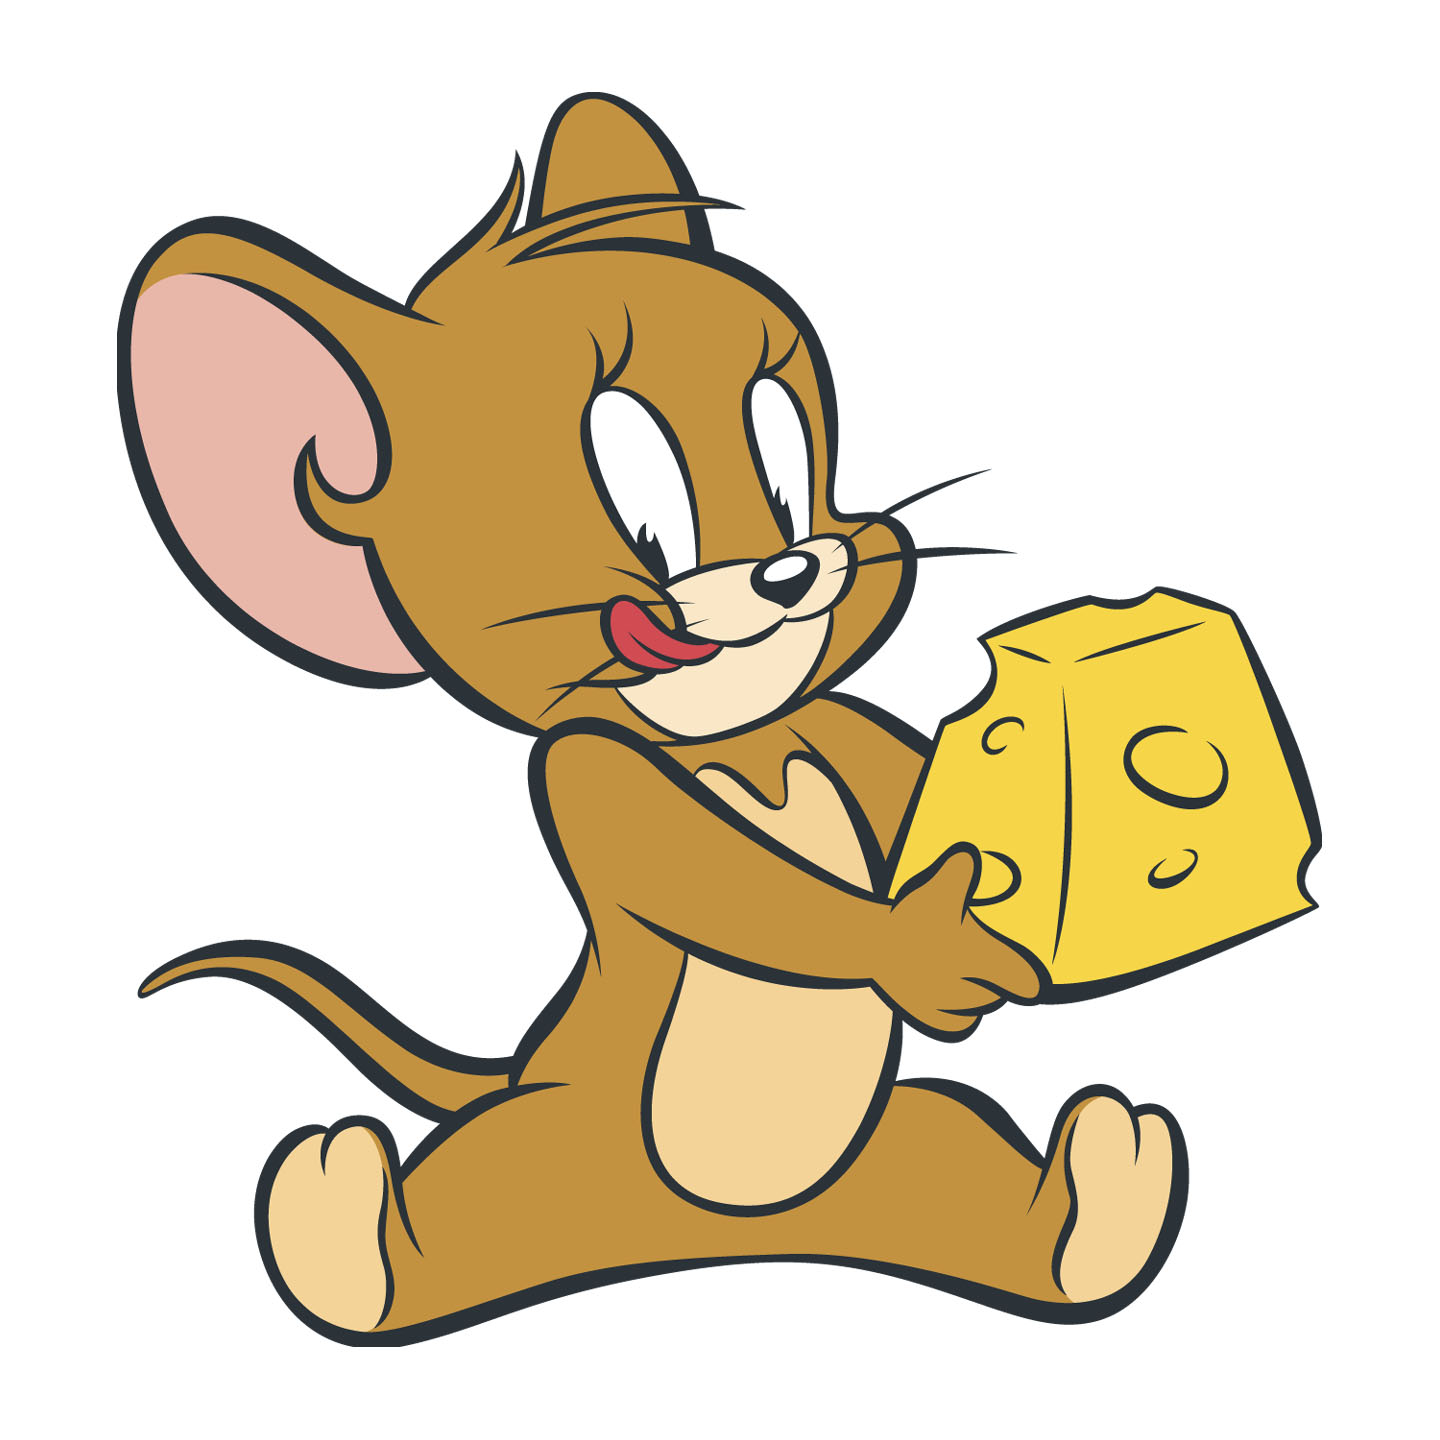 Jerry the Mouse | Villains Wiki | FANDOM powered by Wikia